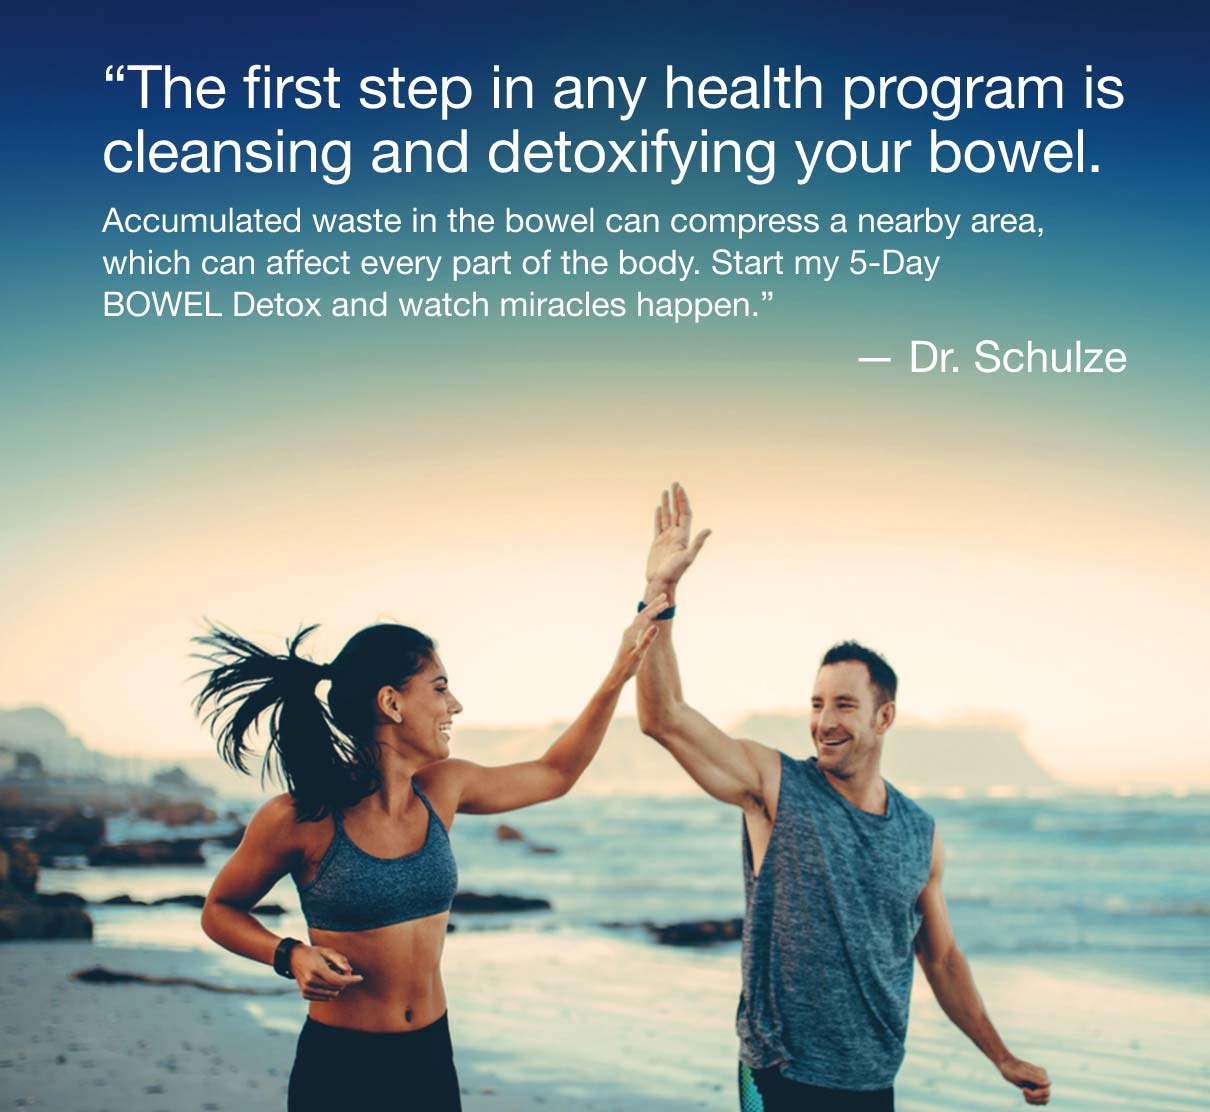 The first step in any health program is cleansing and detoxifying your bowel.